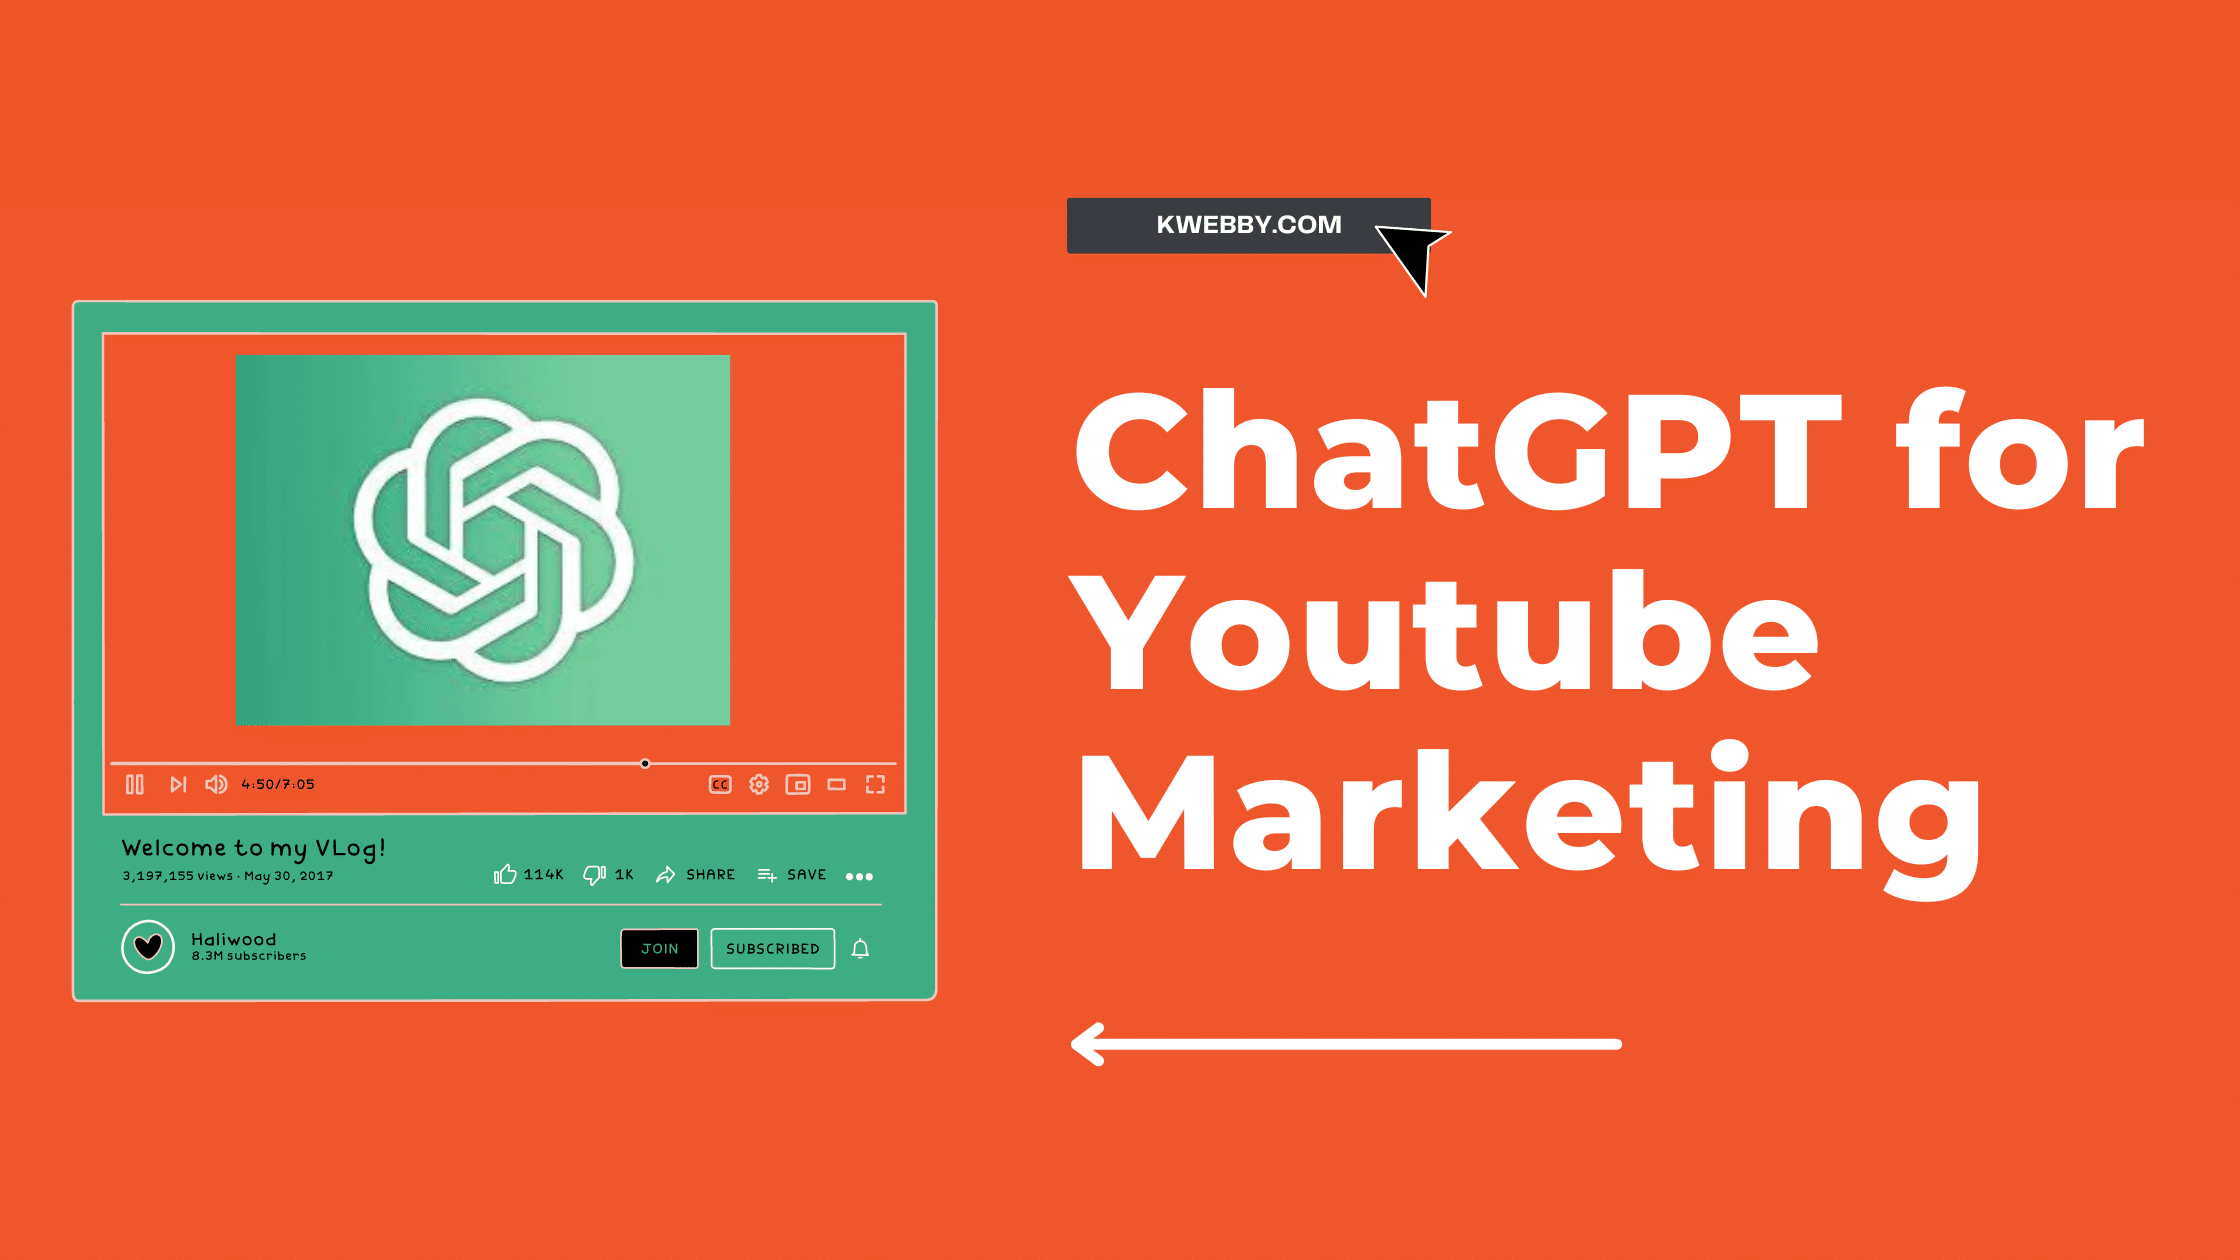 ChatGPT for Youtube Marketing